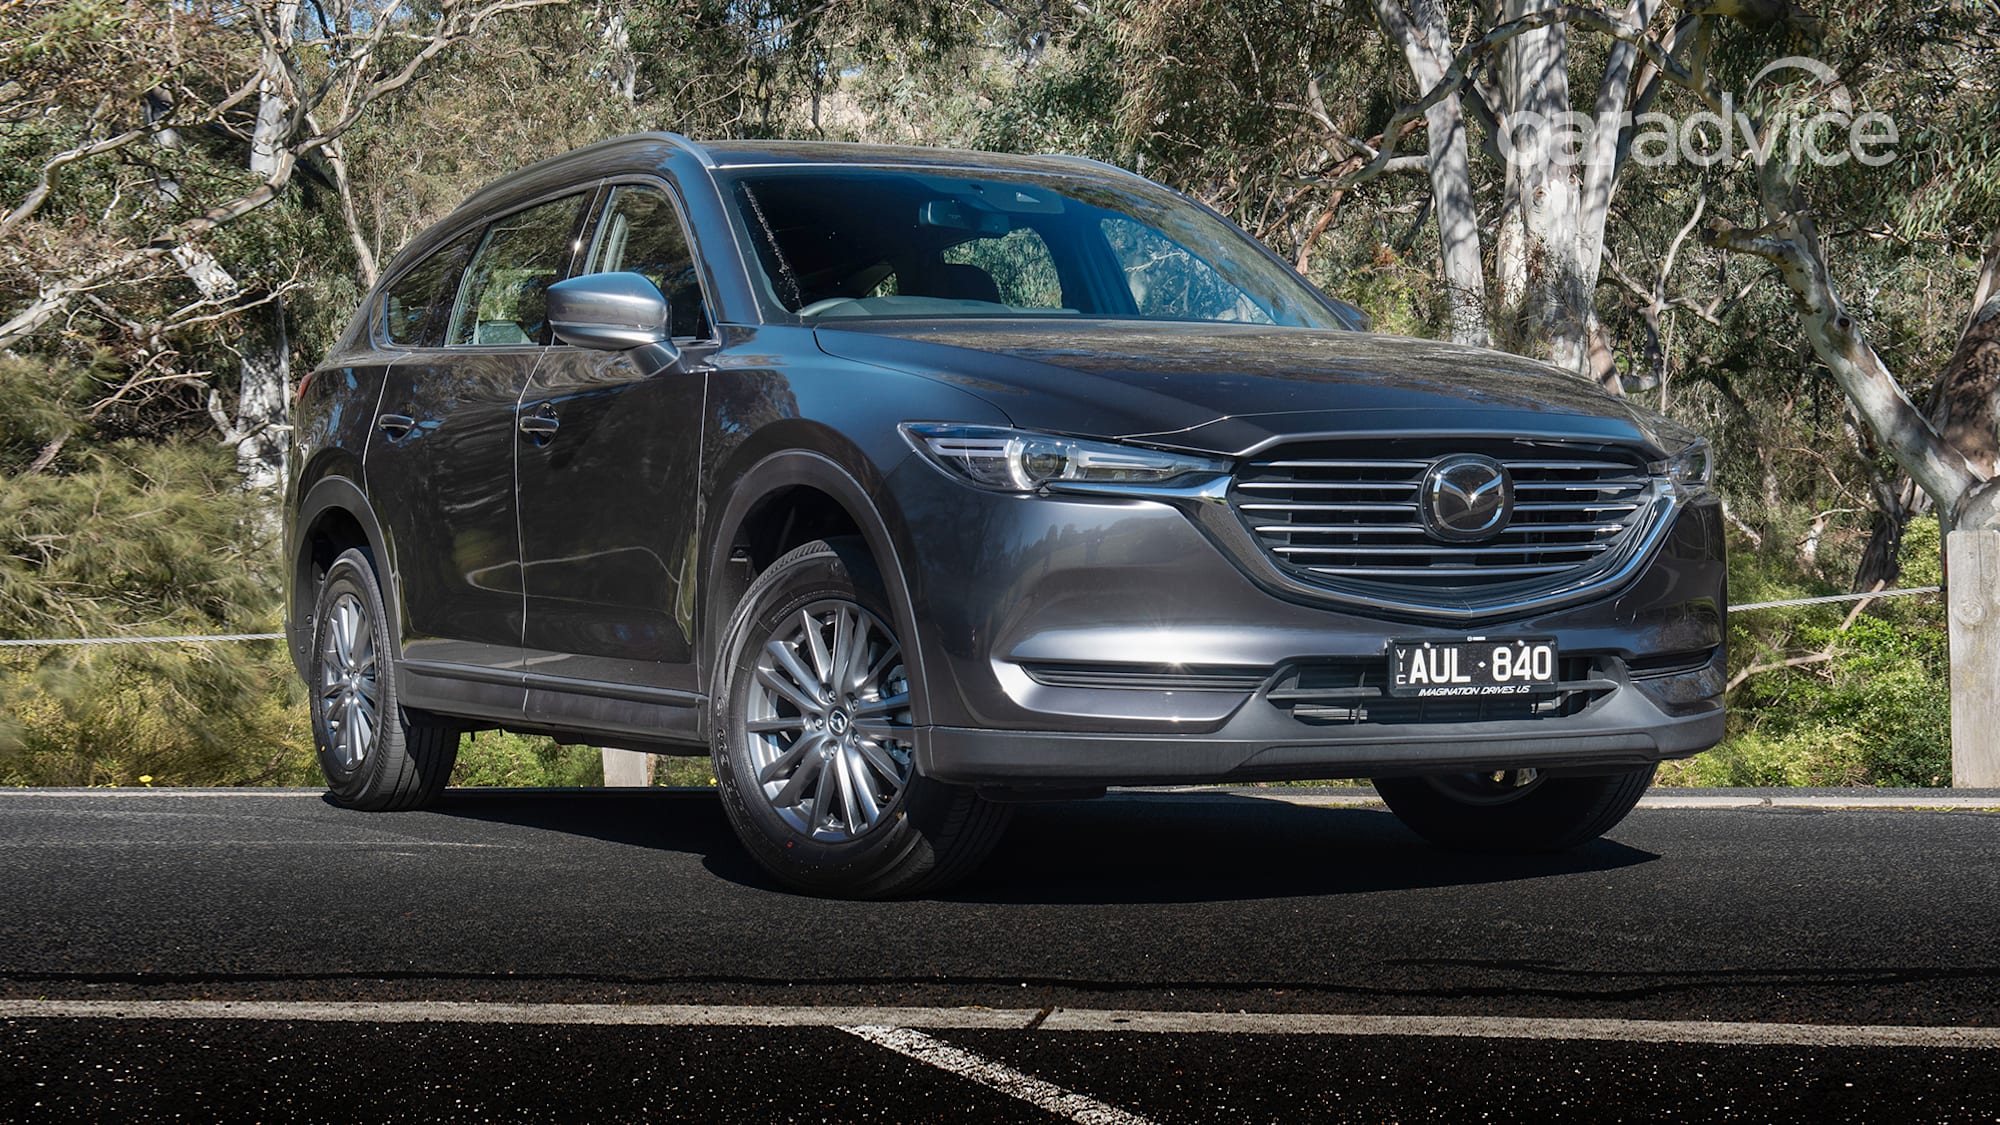 2018 Mazda Cx 8 Sport Fwd Review Caradvice